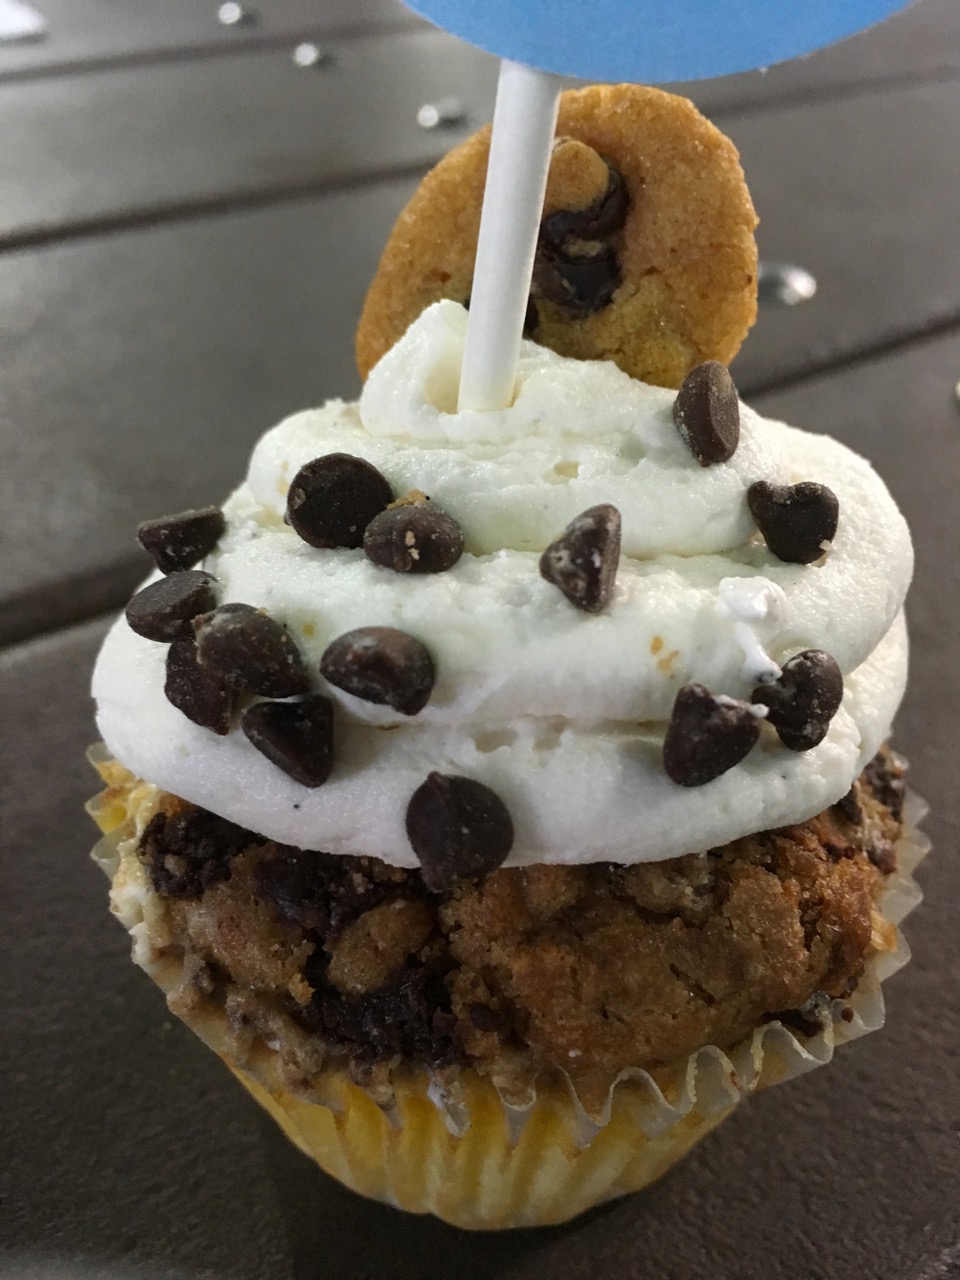 Is it a cooke? or a cupcake? It's both! Treated to this cupcake at the San Diego zoo sleepover